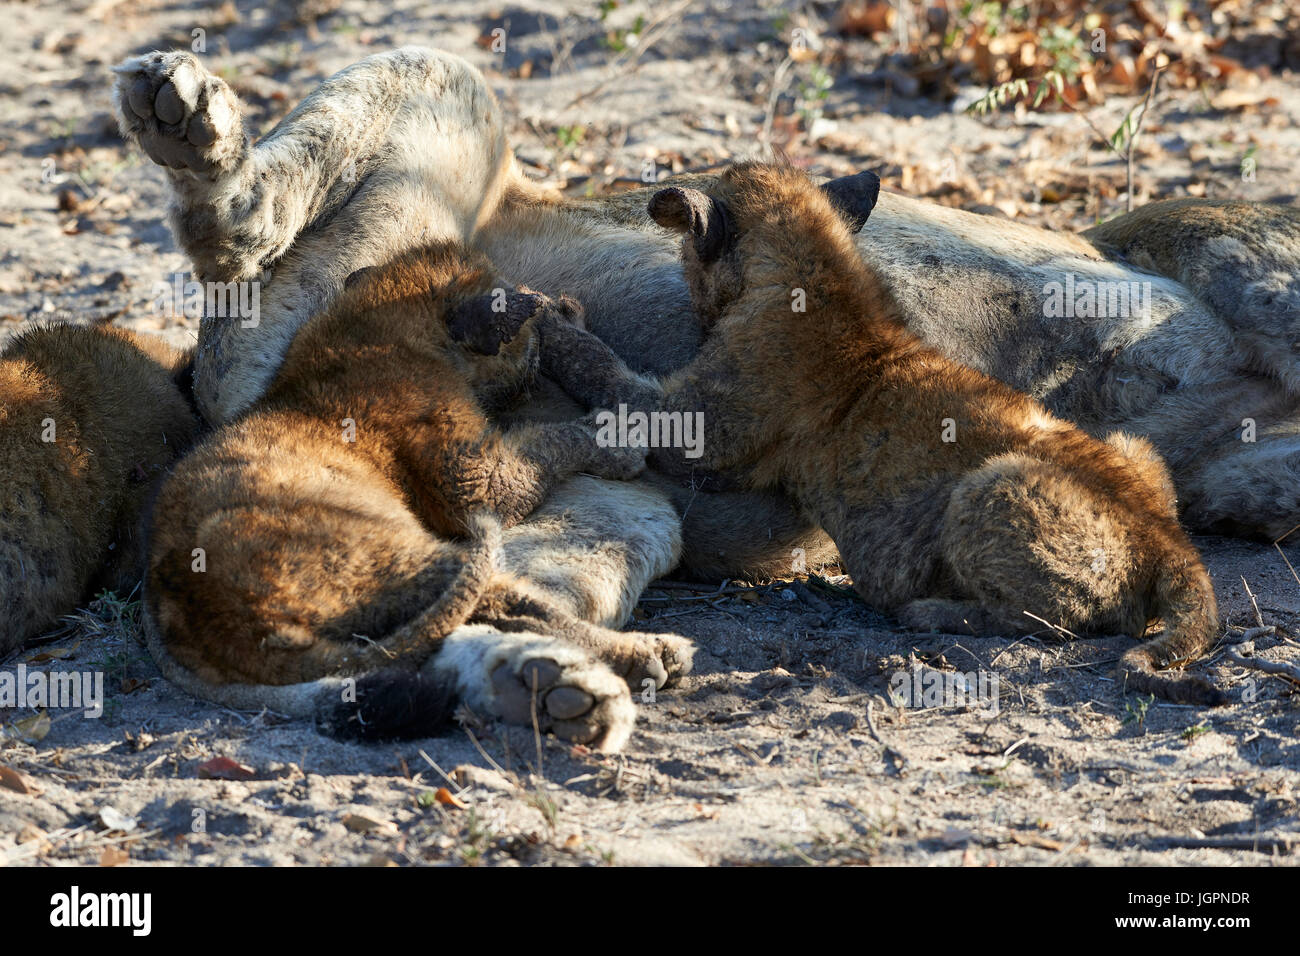 Lioness, Panthera leo, with cubs feeding having eaten her fill of buffalo, Sabie Sands game reserve, South Africa Stock Photo